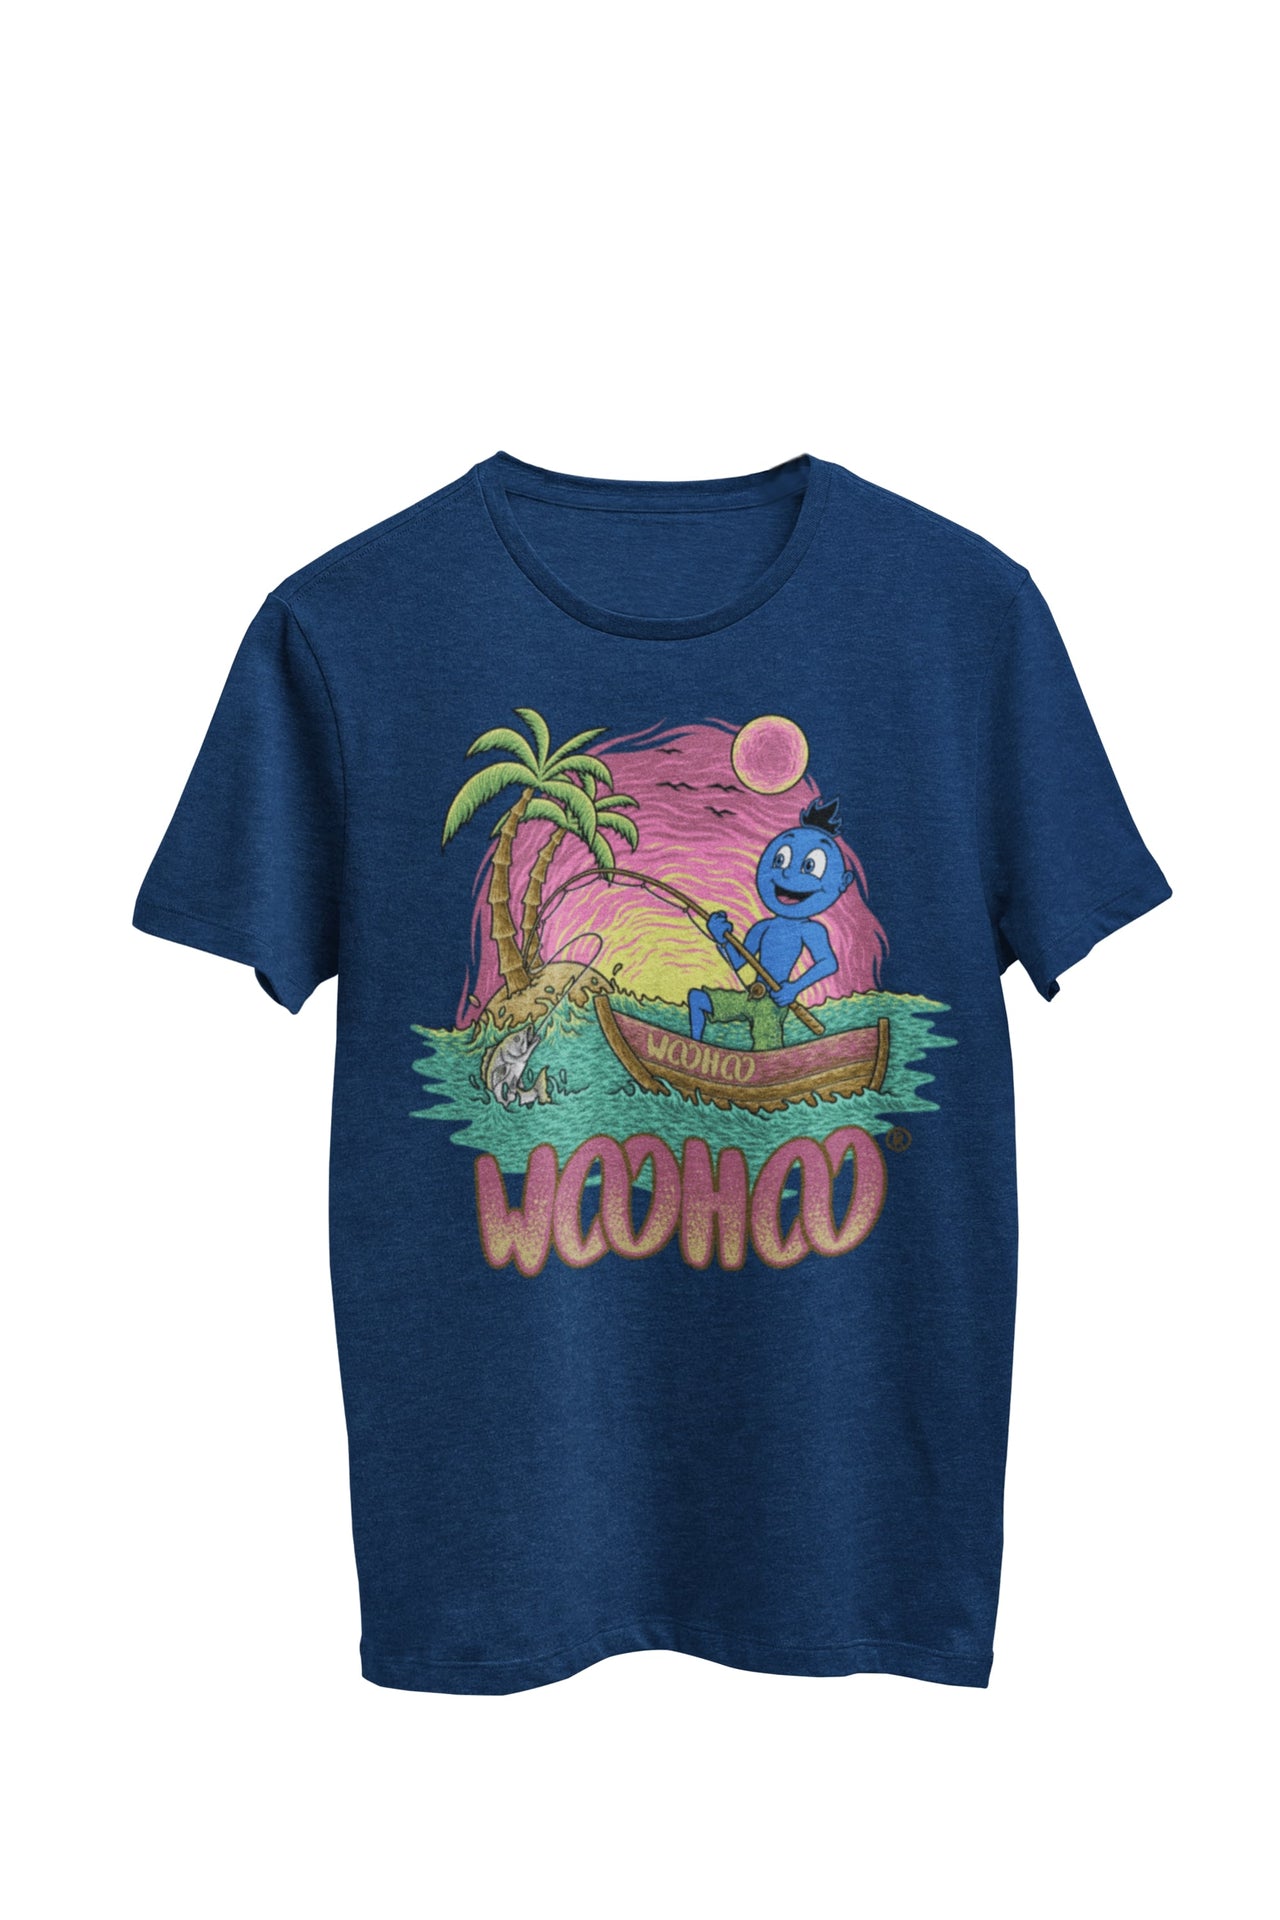 WooHooBerry immersed in the serene pursuit of fishing from a rowboat, an outdoor sporting endeavor. Their navy T-shirt proudly showcases the text 'WooHoo,' enhancing the peaceful and enjoyable nature of the scene."